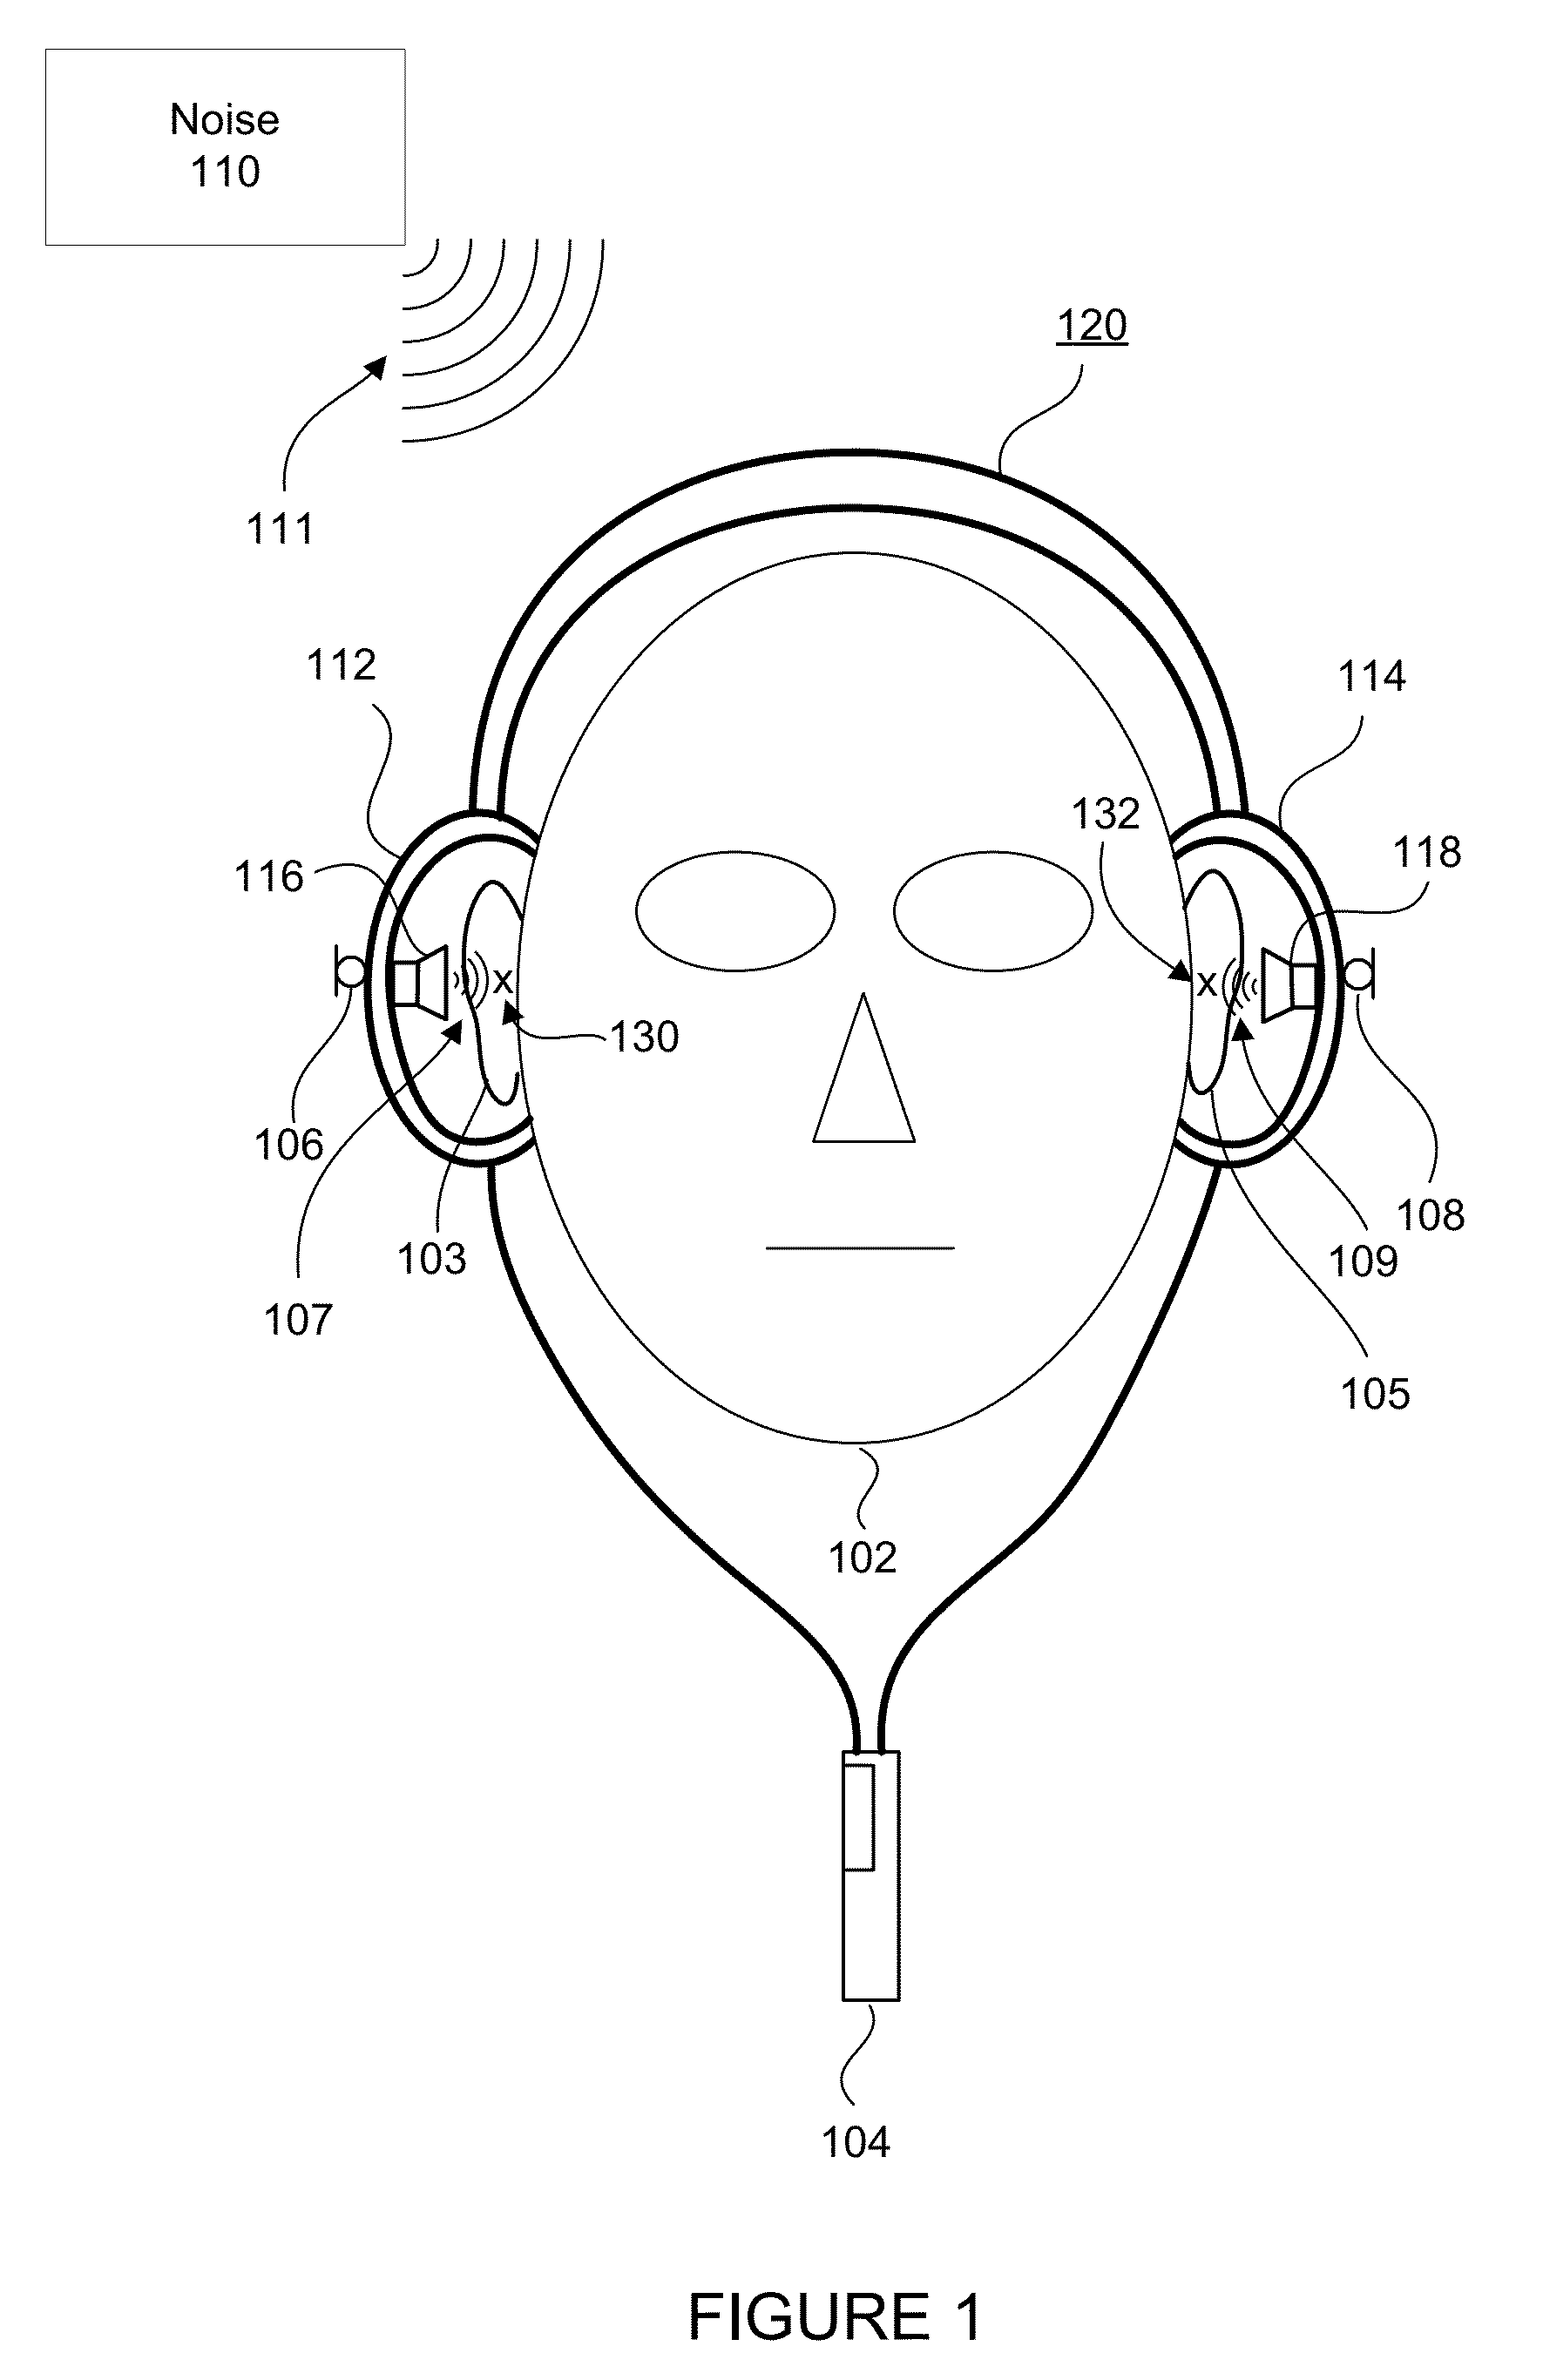 Direction-aware active noise cancellation system